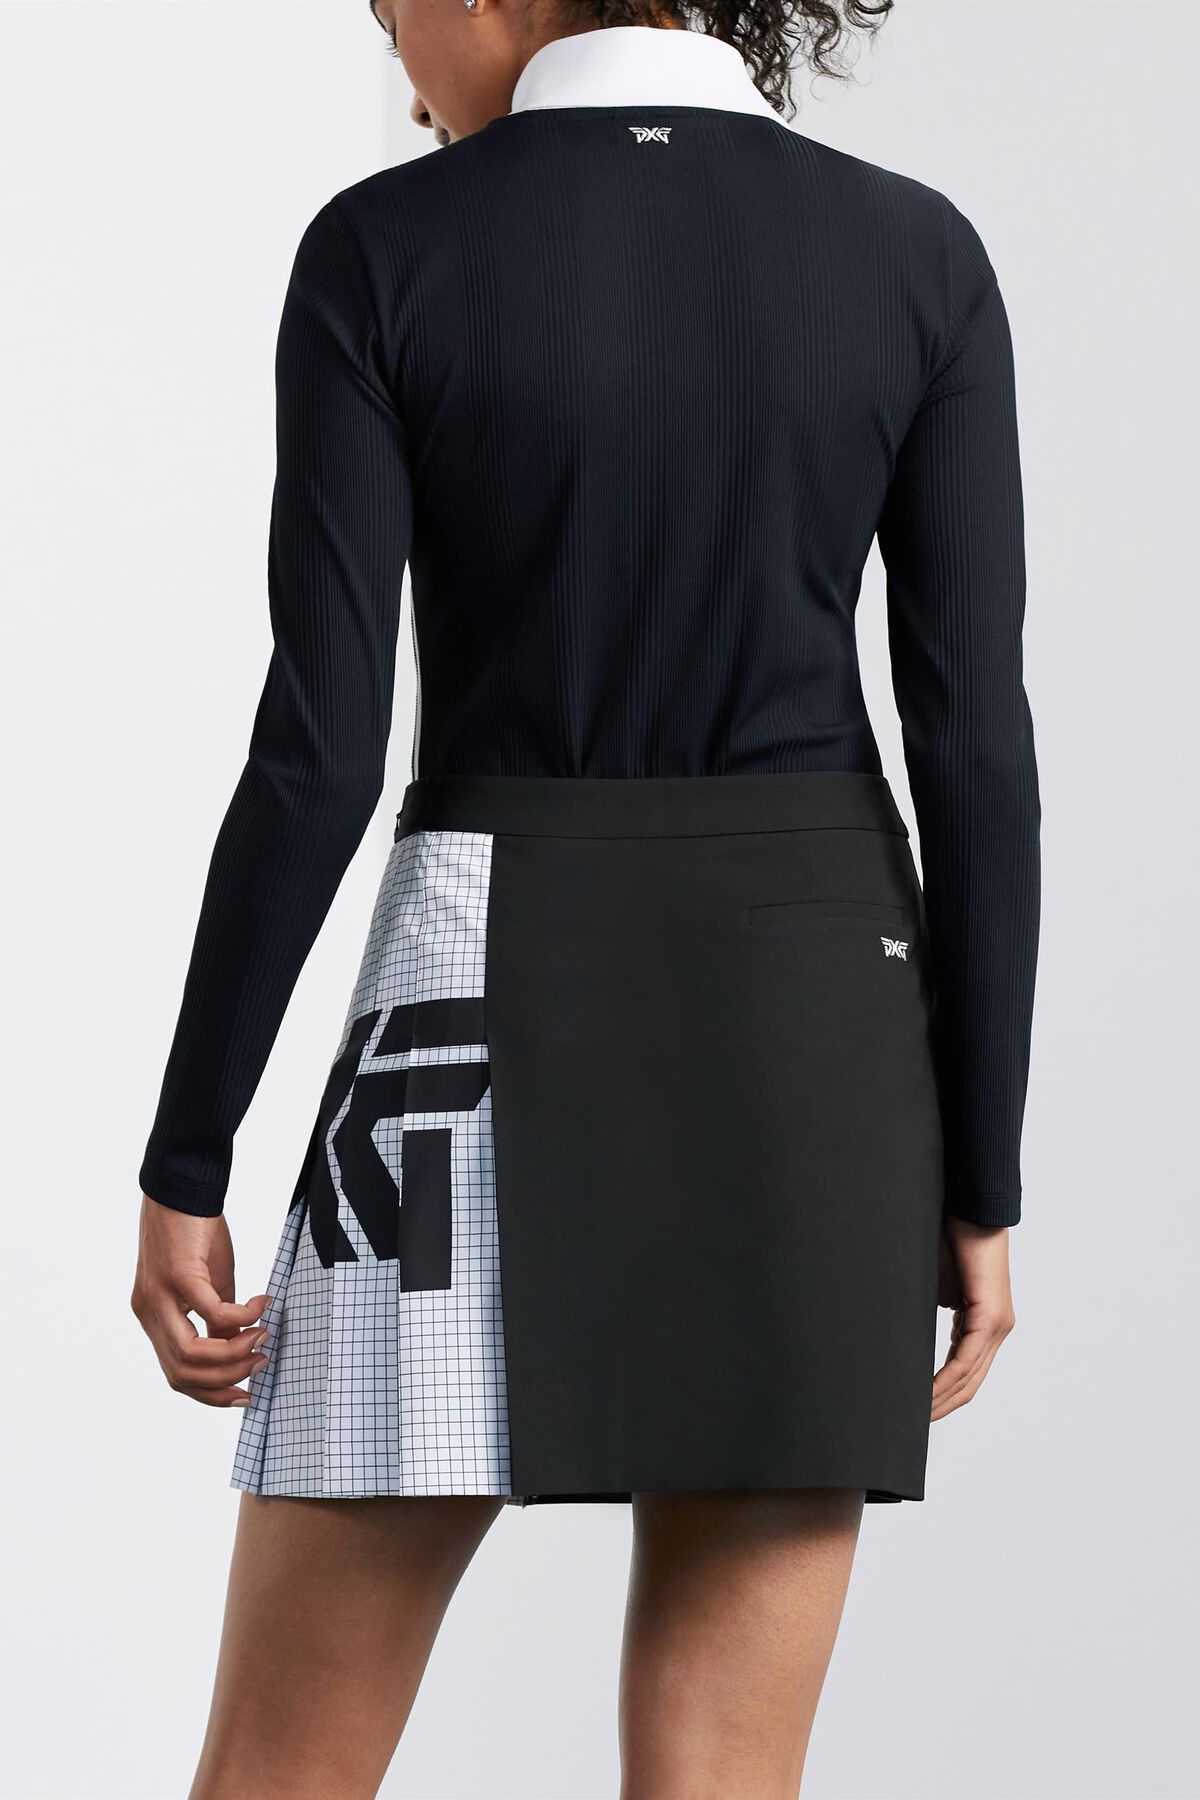 PXG Women's Big Logo Color Block Pleated Skirt | Size Small